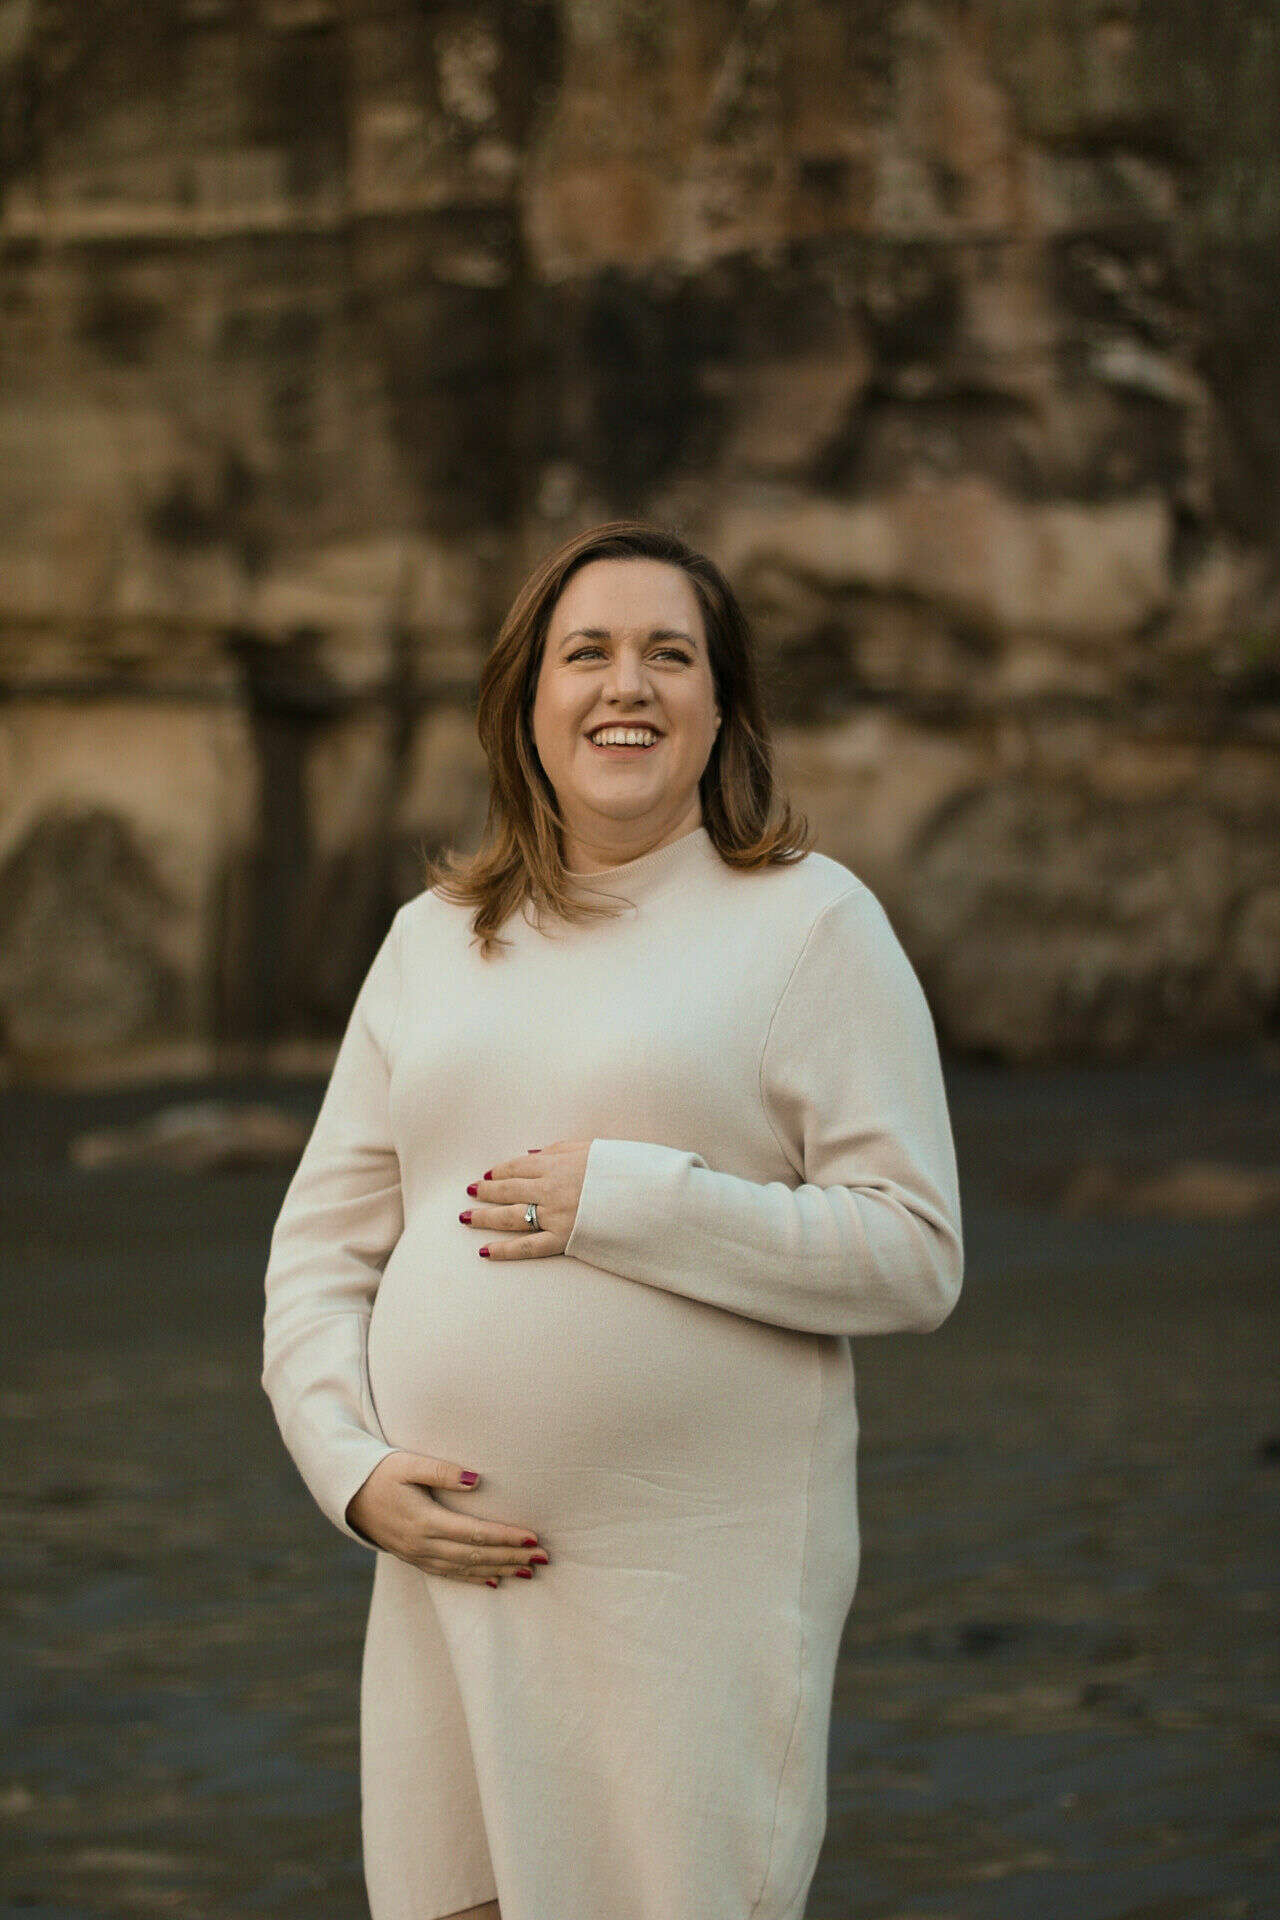 Image shows Natalie standing on a beach wearing a white long sleeve dress holding her baby bump laughing towards the camera